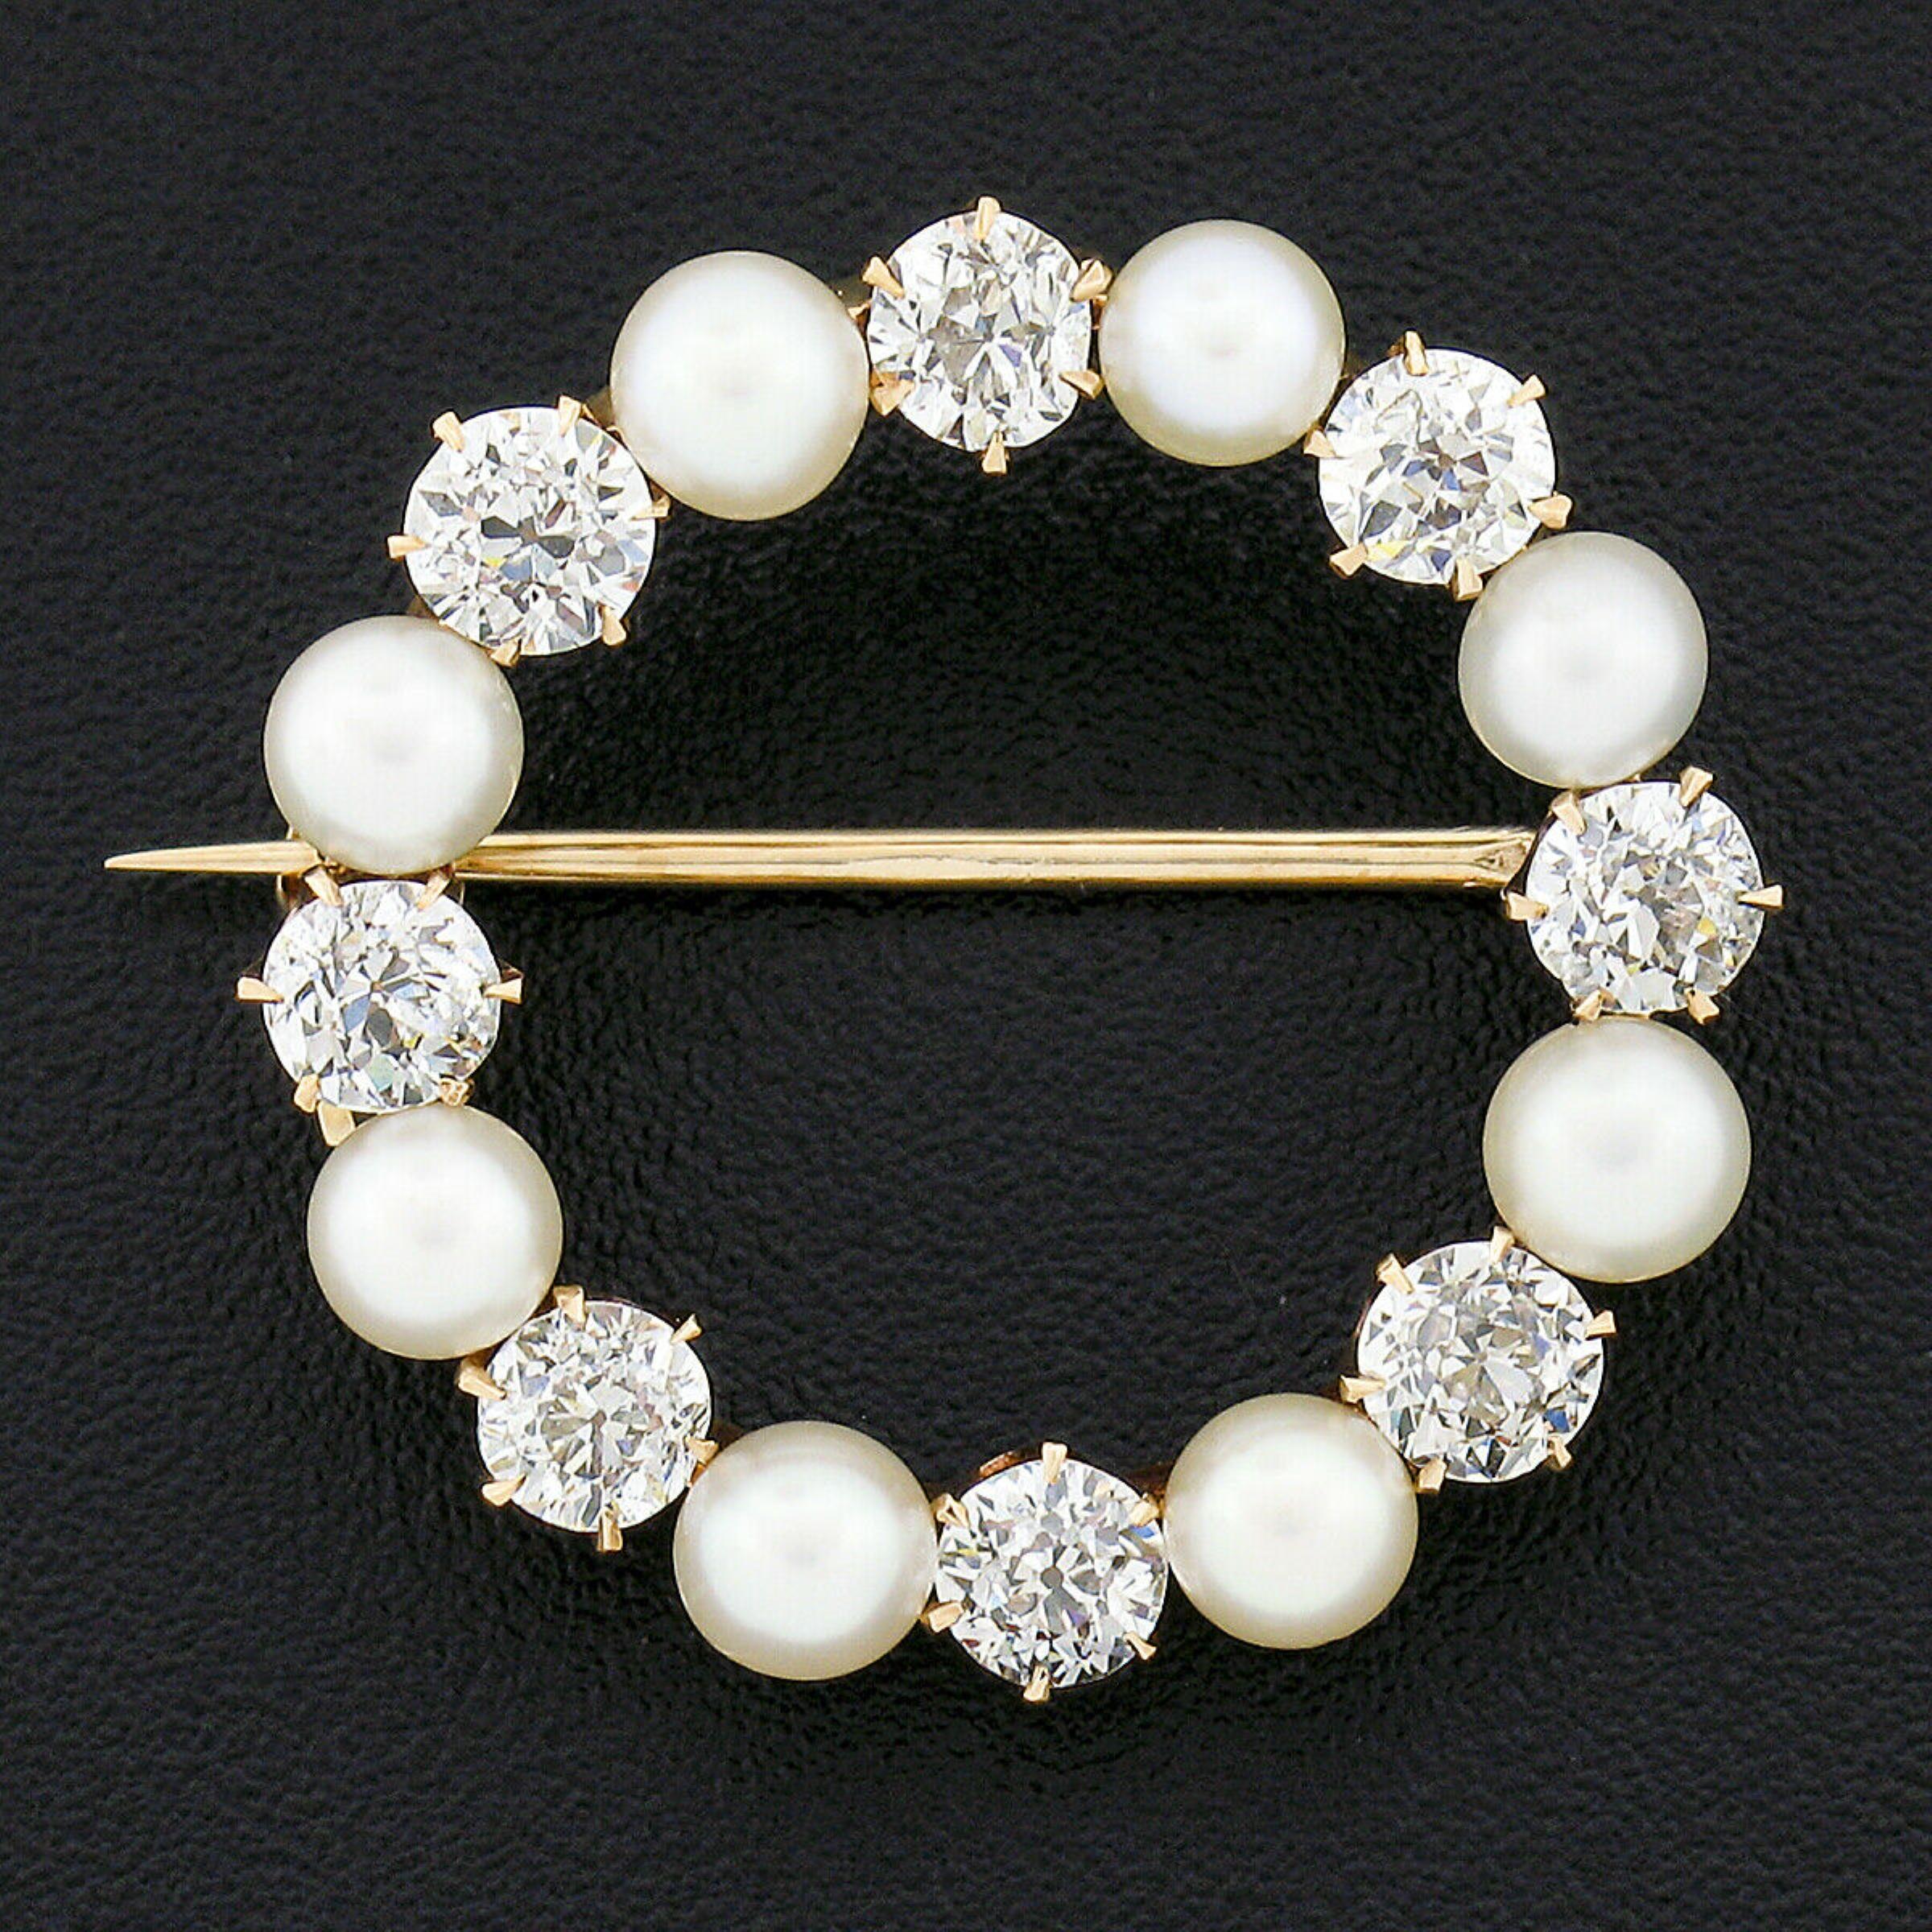 This absolutely gorgeous antique brooch was crafted during the 1900's from solid 14k gold. It features an incredible circle of pearls and diamonds that alternate throughout its simple circular wreath design. The very high quality pearls are well